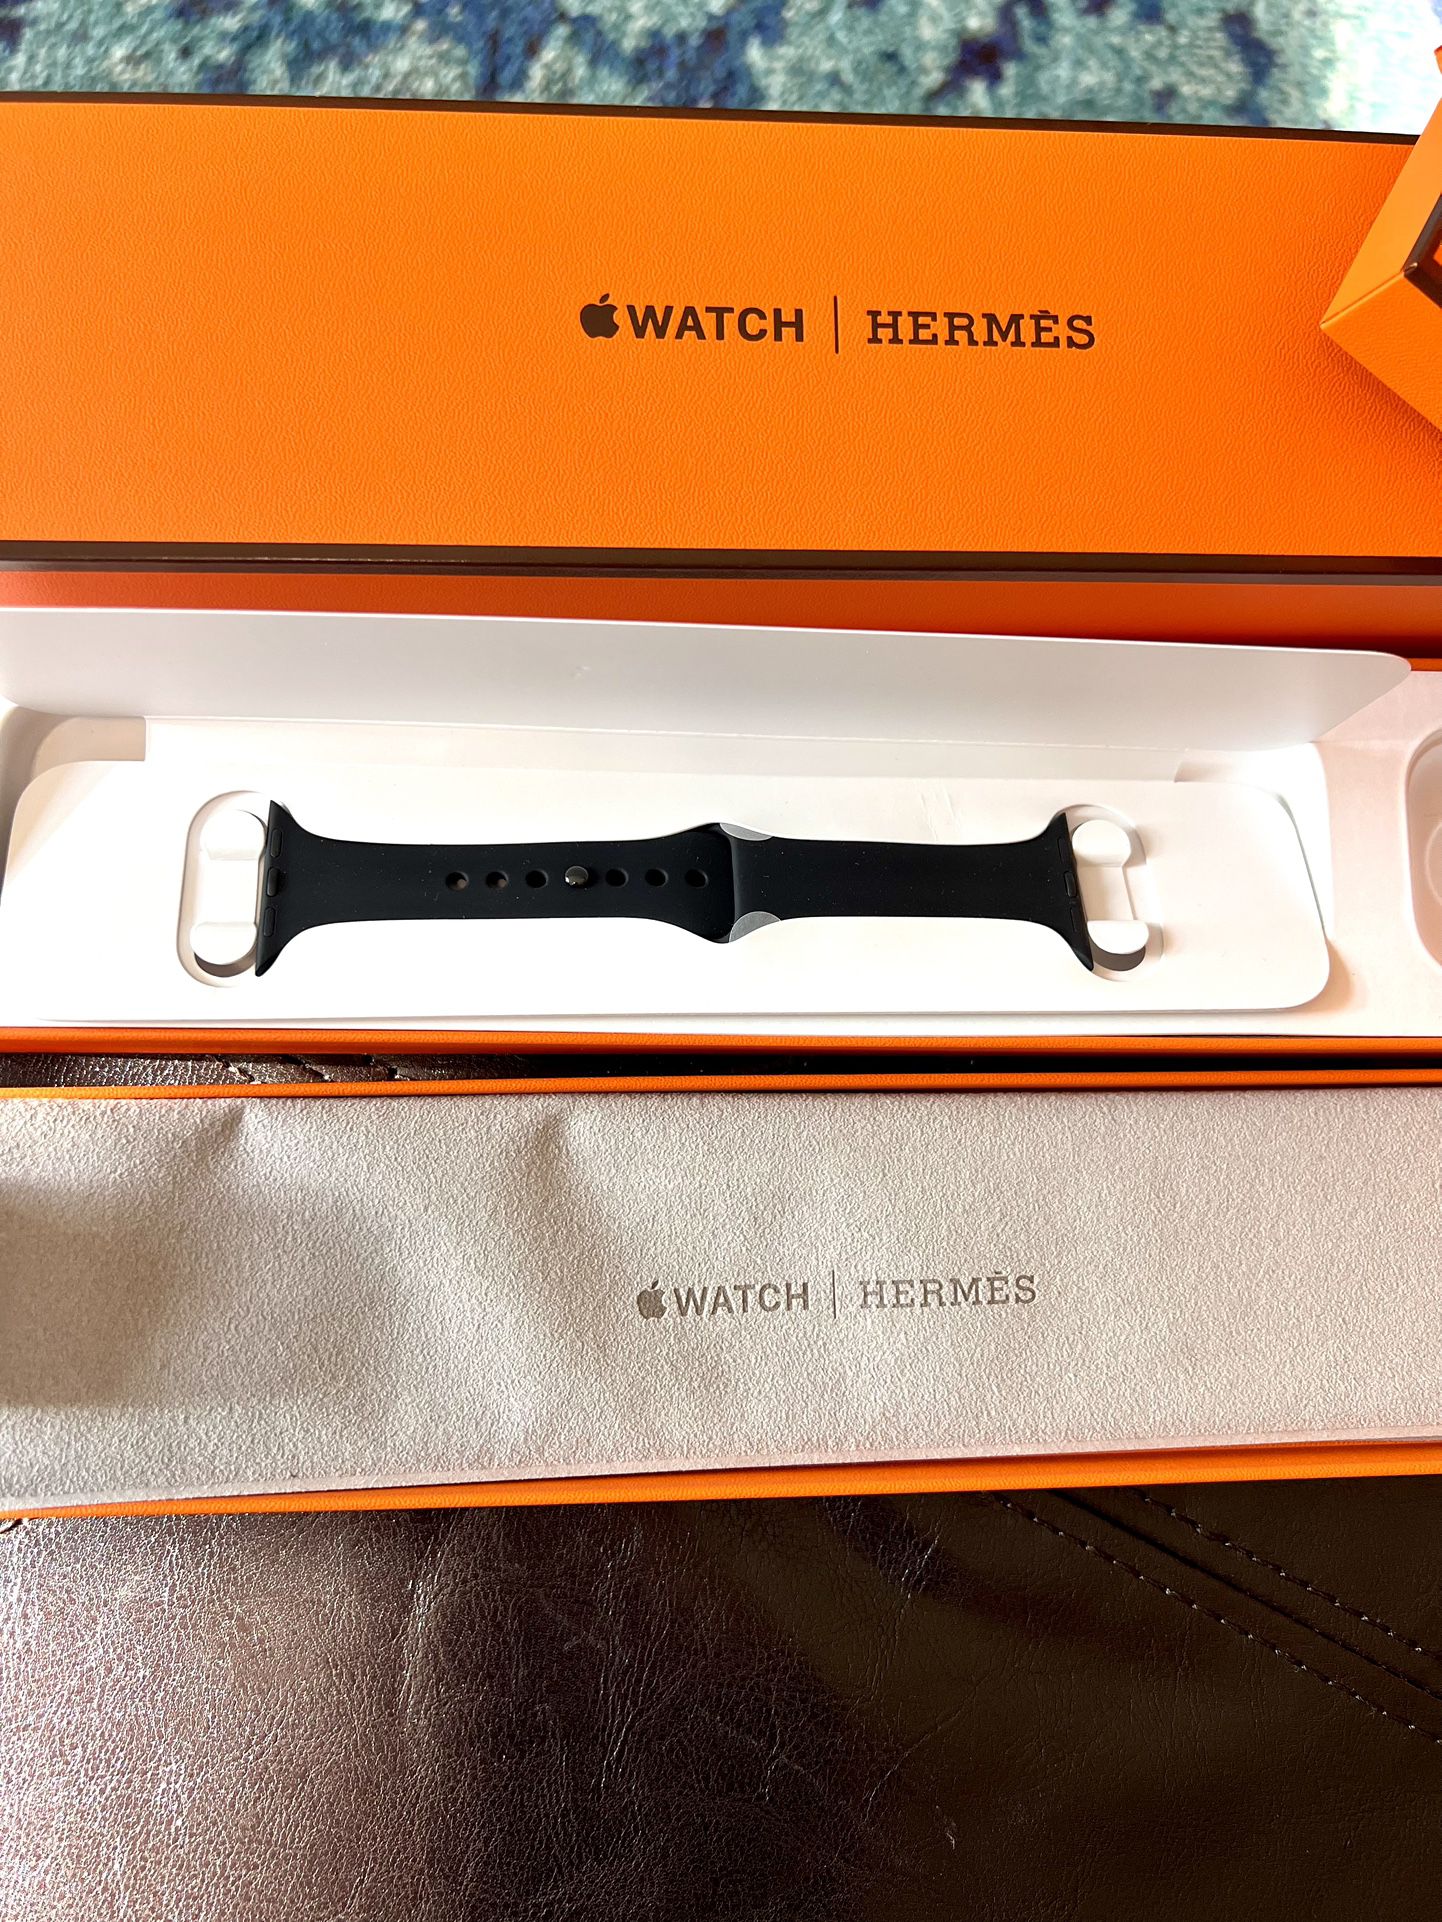 Hermes Apple Watch Wrist Band In A Box ONLY